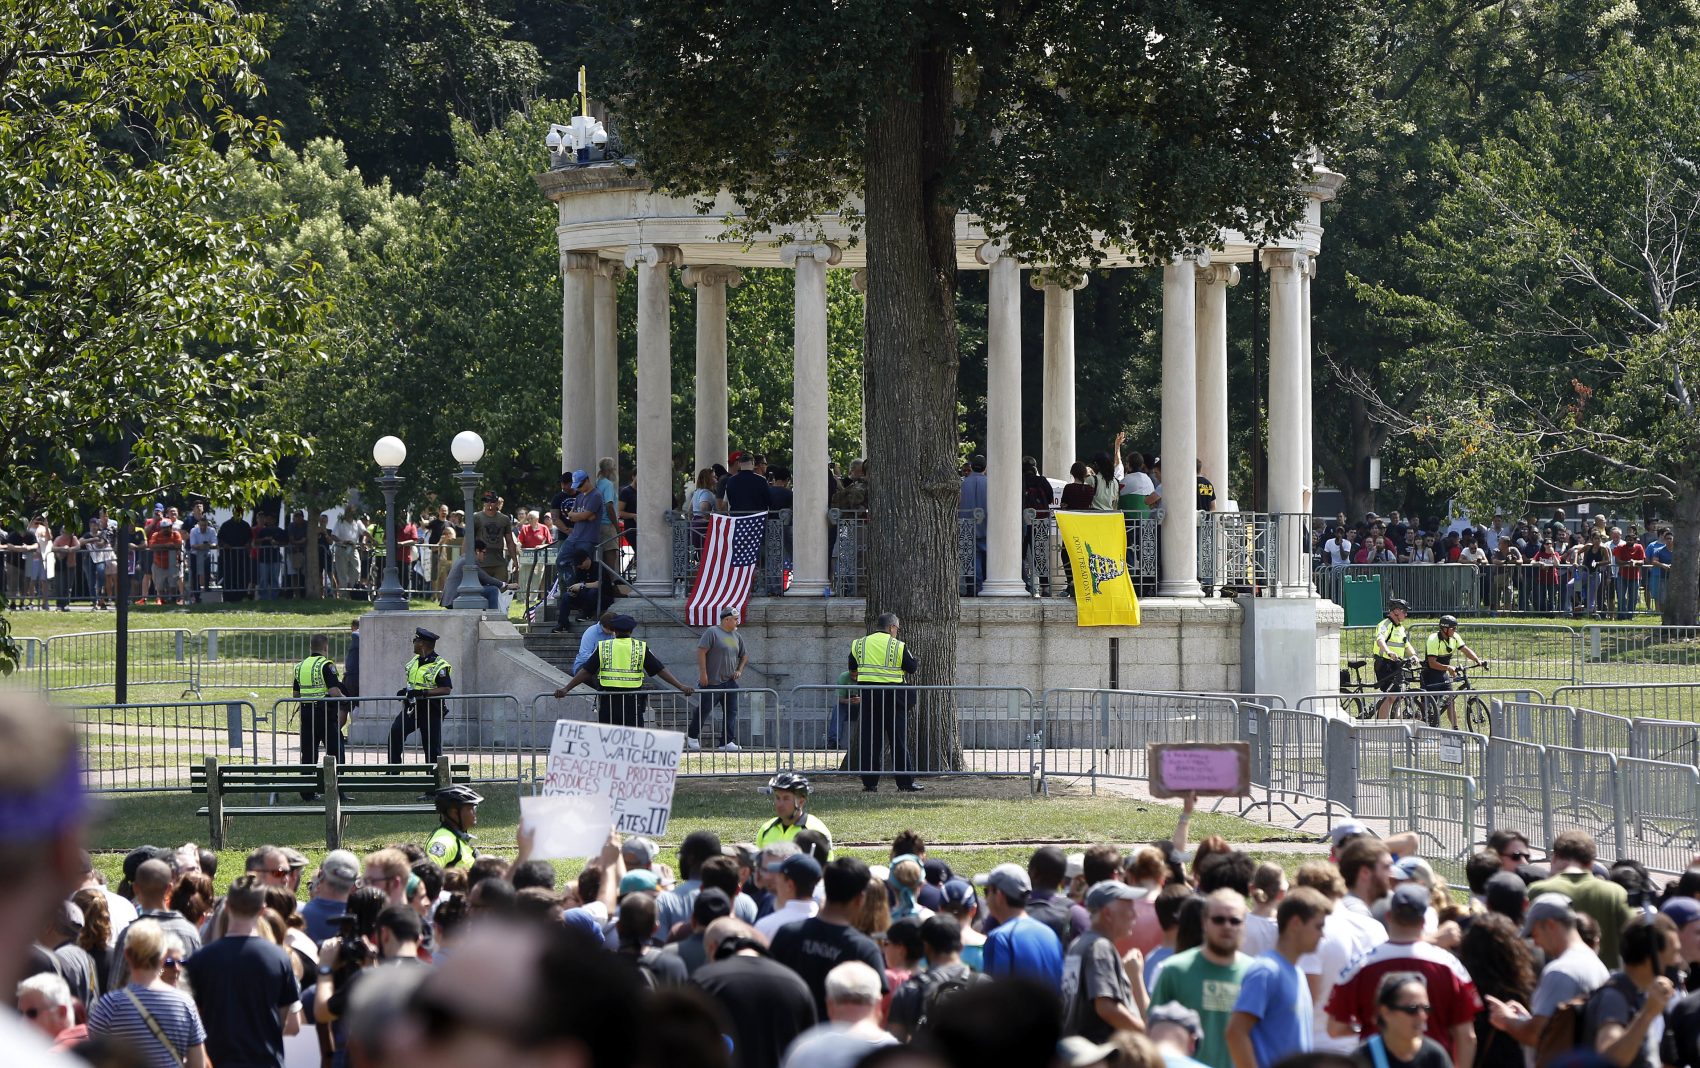 Organizers stand on the bandstand on Boston Common during a self-described free speech rally staged on Saturday in Boston. Counter-protesters stand along barricades ringing the bandstand. (Michael Dwyer/AP)